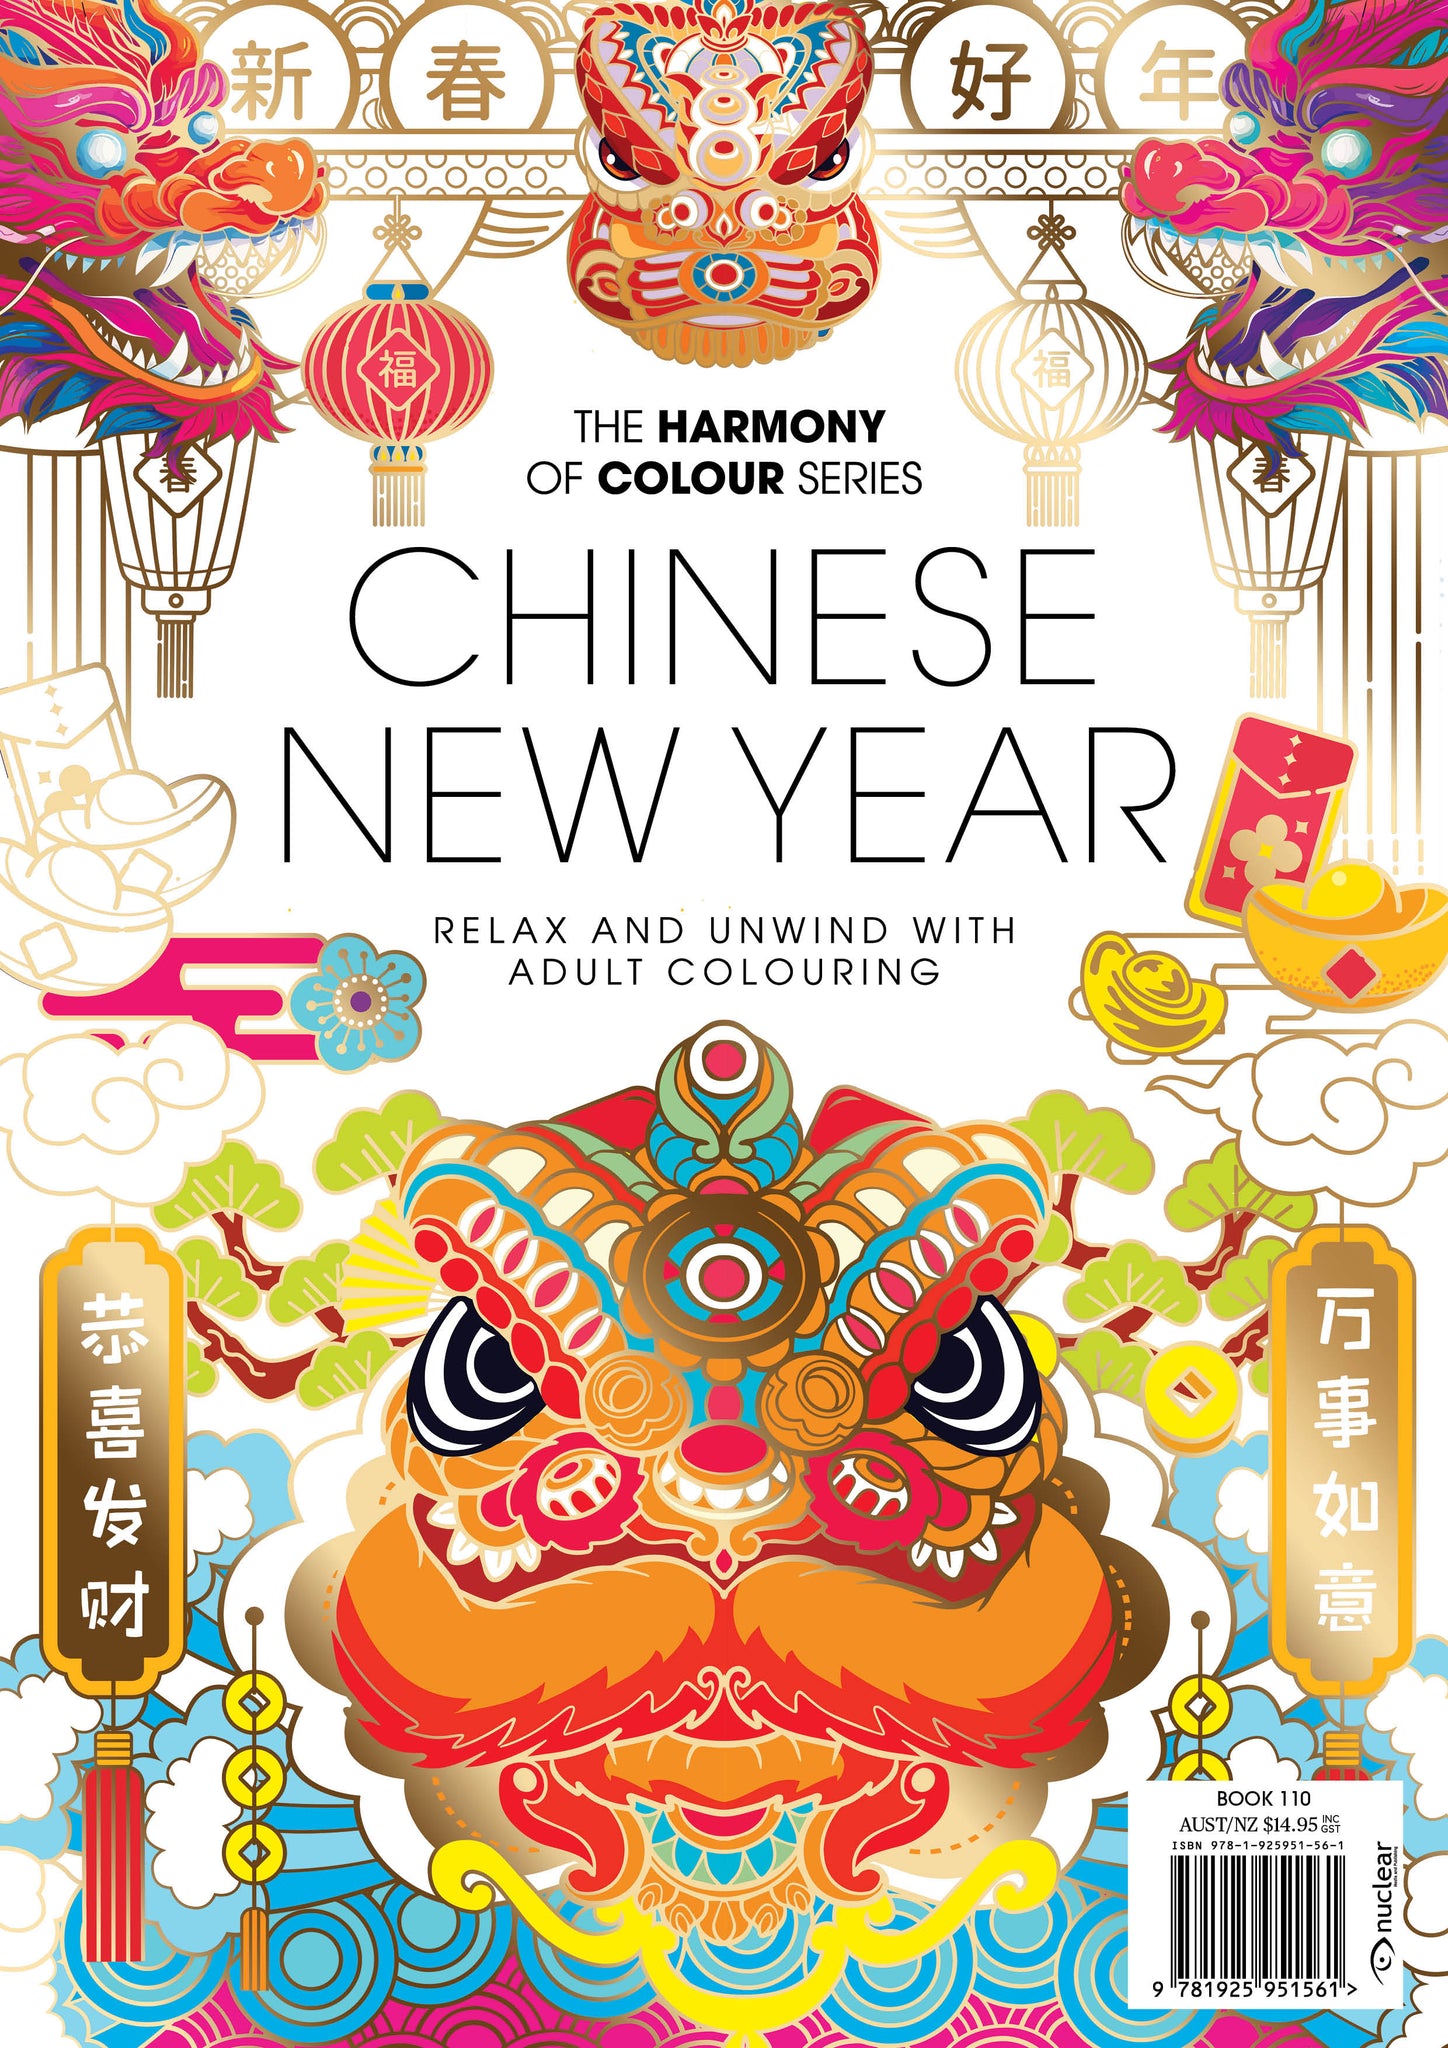 110. Harmony of Colour Book One Hundred and Ten: Chinese New Year (PRINTABLE DIGITAL EDITION ALSO AVAILABLE!)